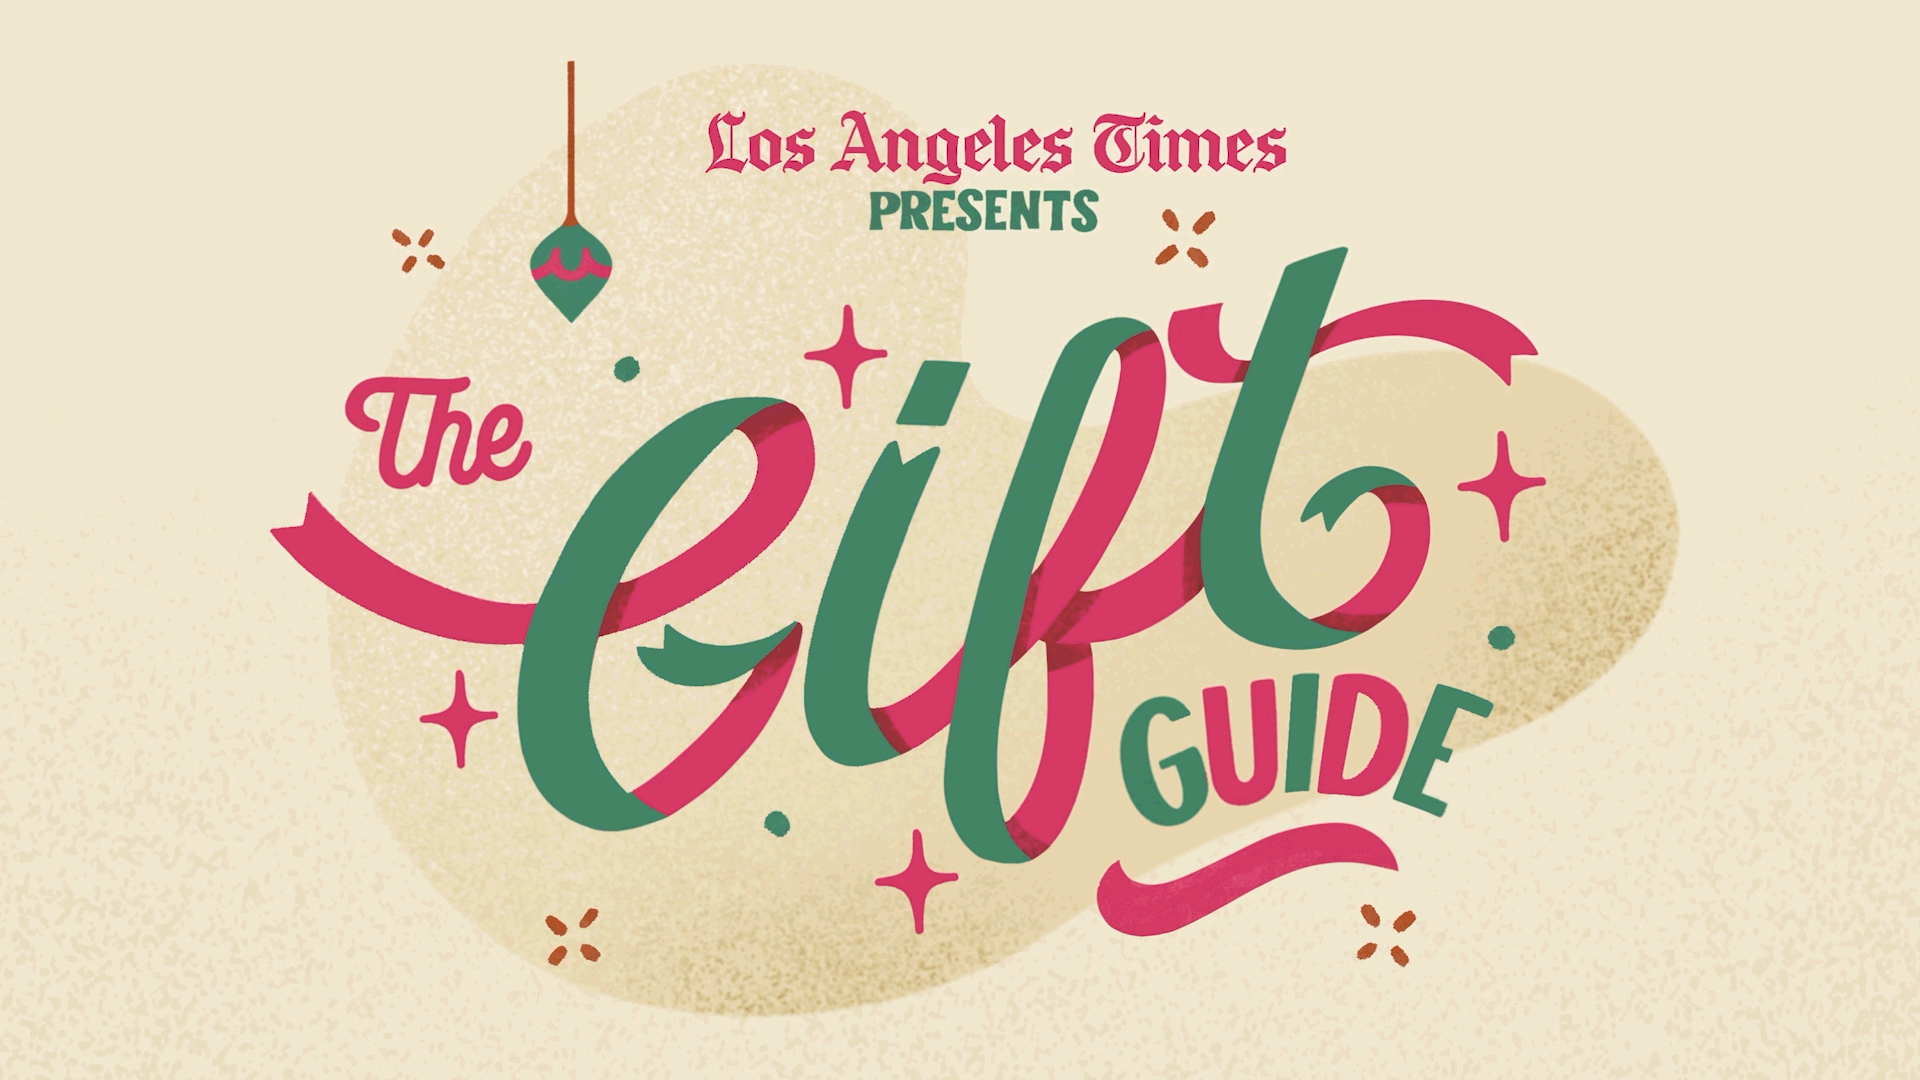 L.A. Times 2021 holiday gift guide Los Angeles Times